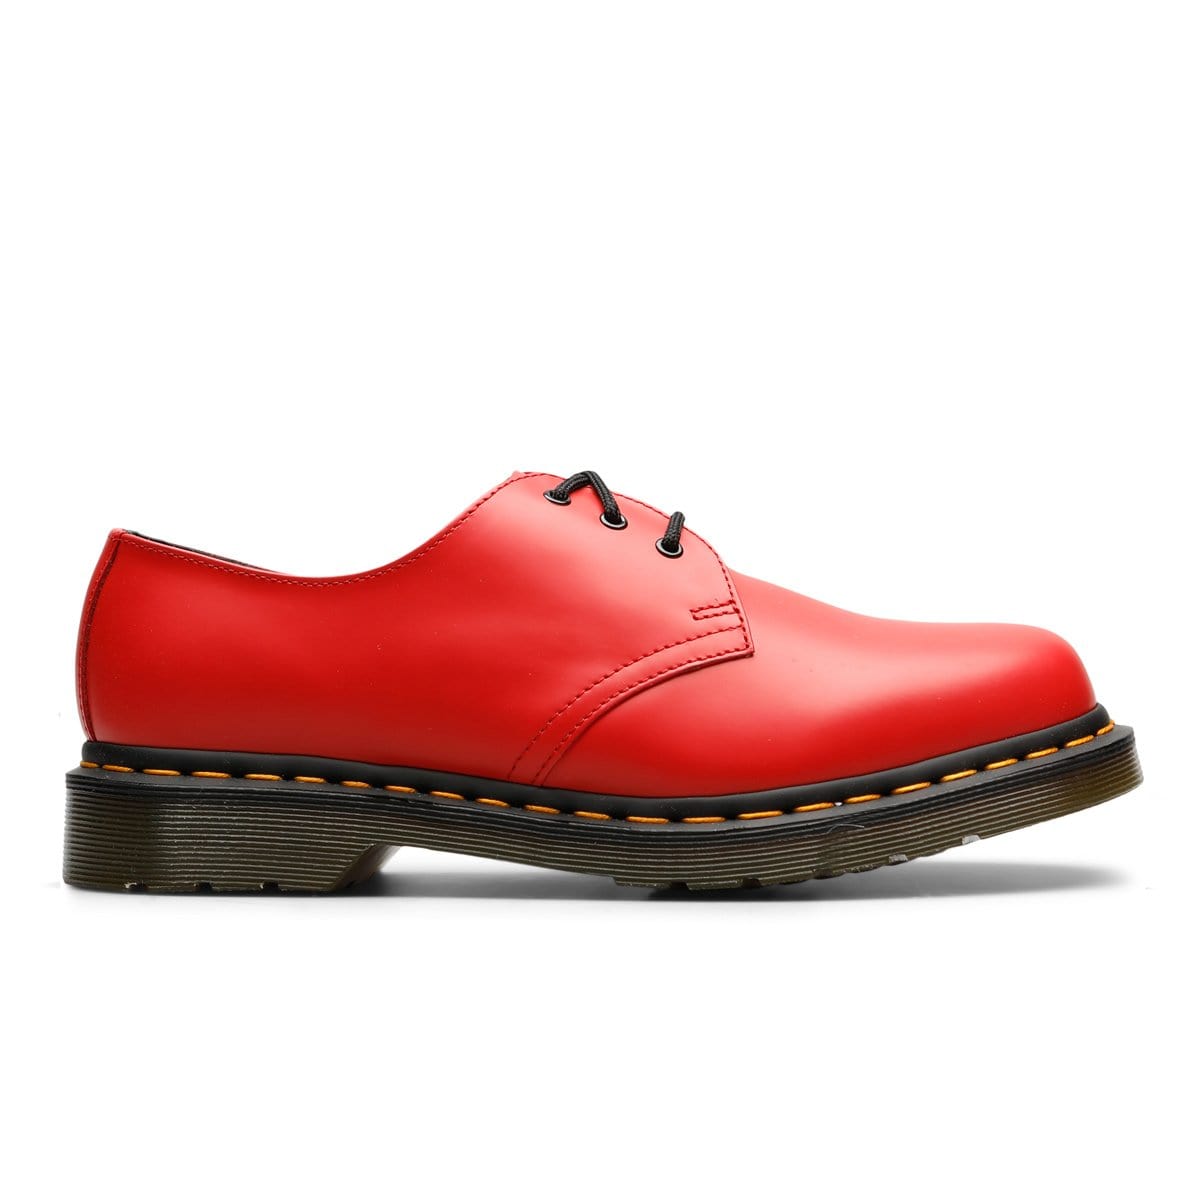 Dr. Martens Shoes 1461 SMOOTH